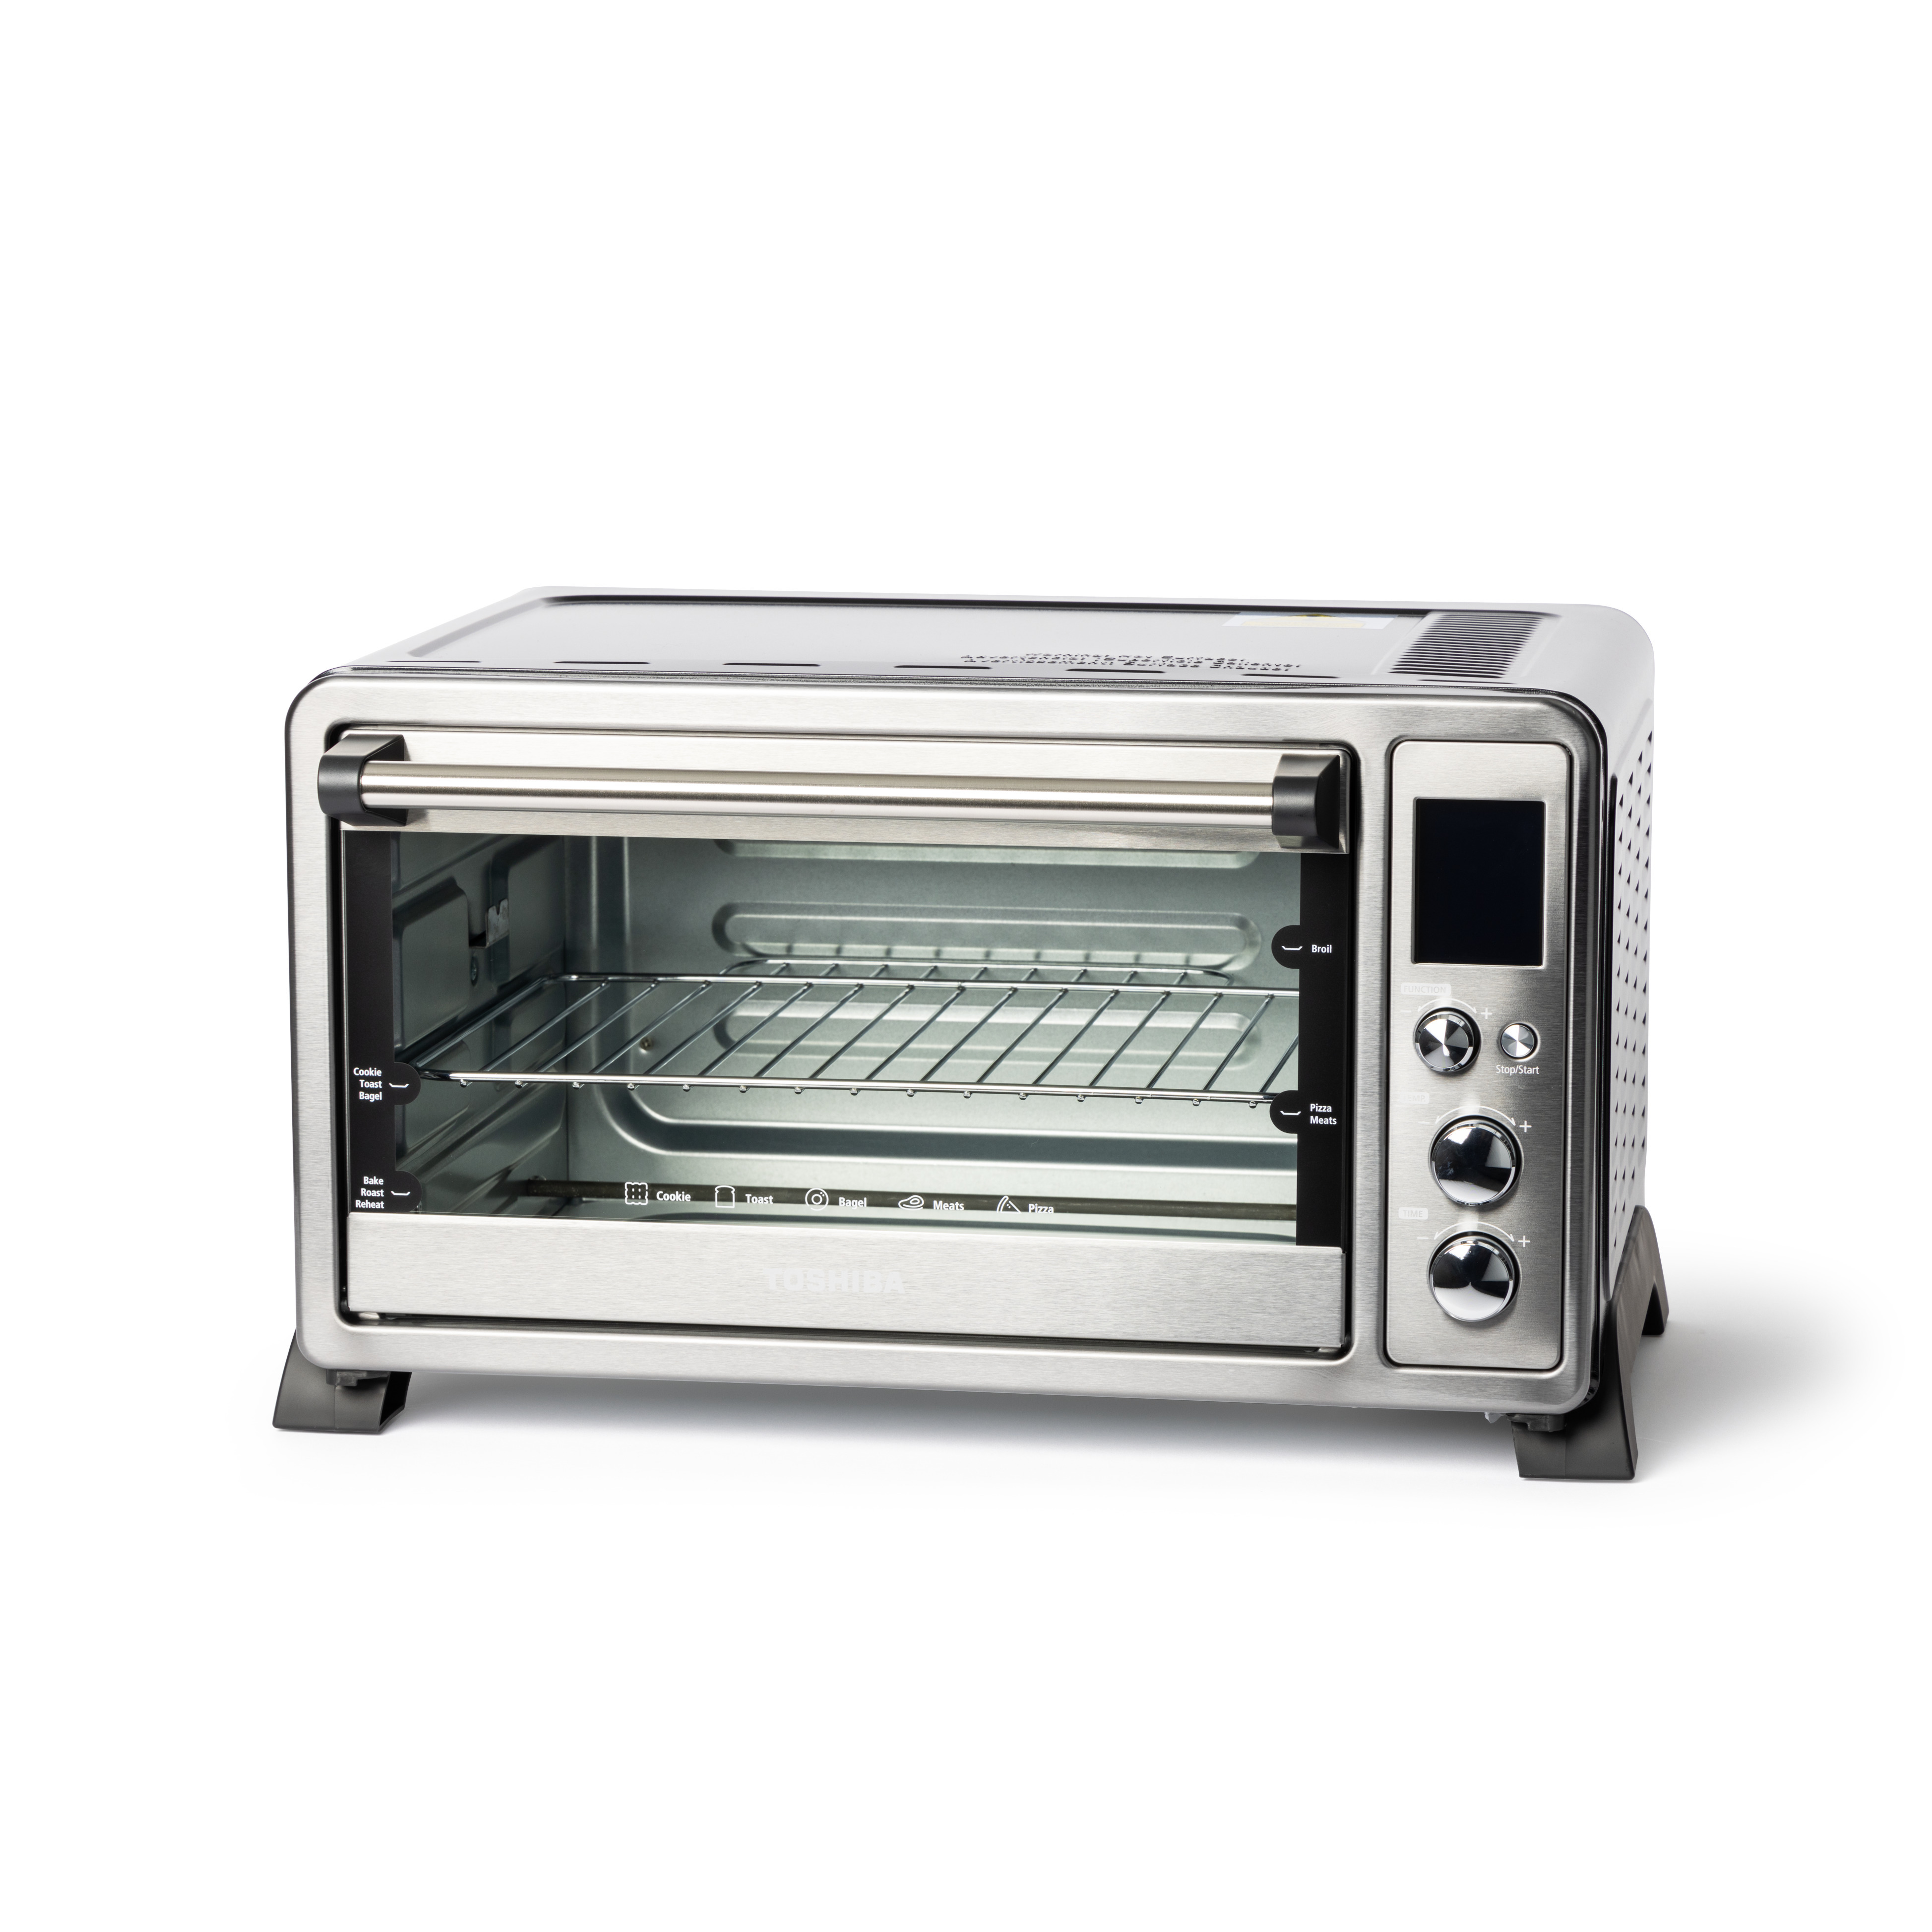 GE 6-Slice Stainless Steel Convection Toaster Oven with Quartz